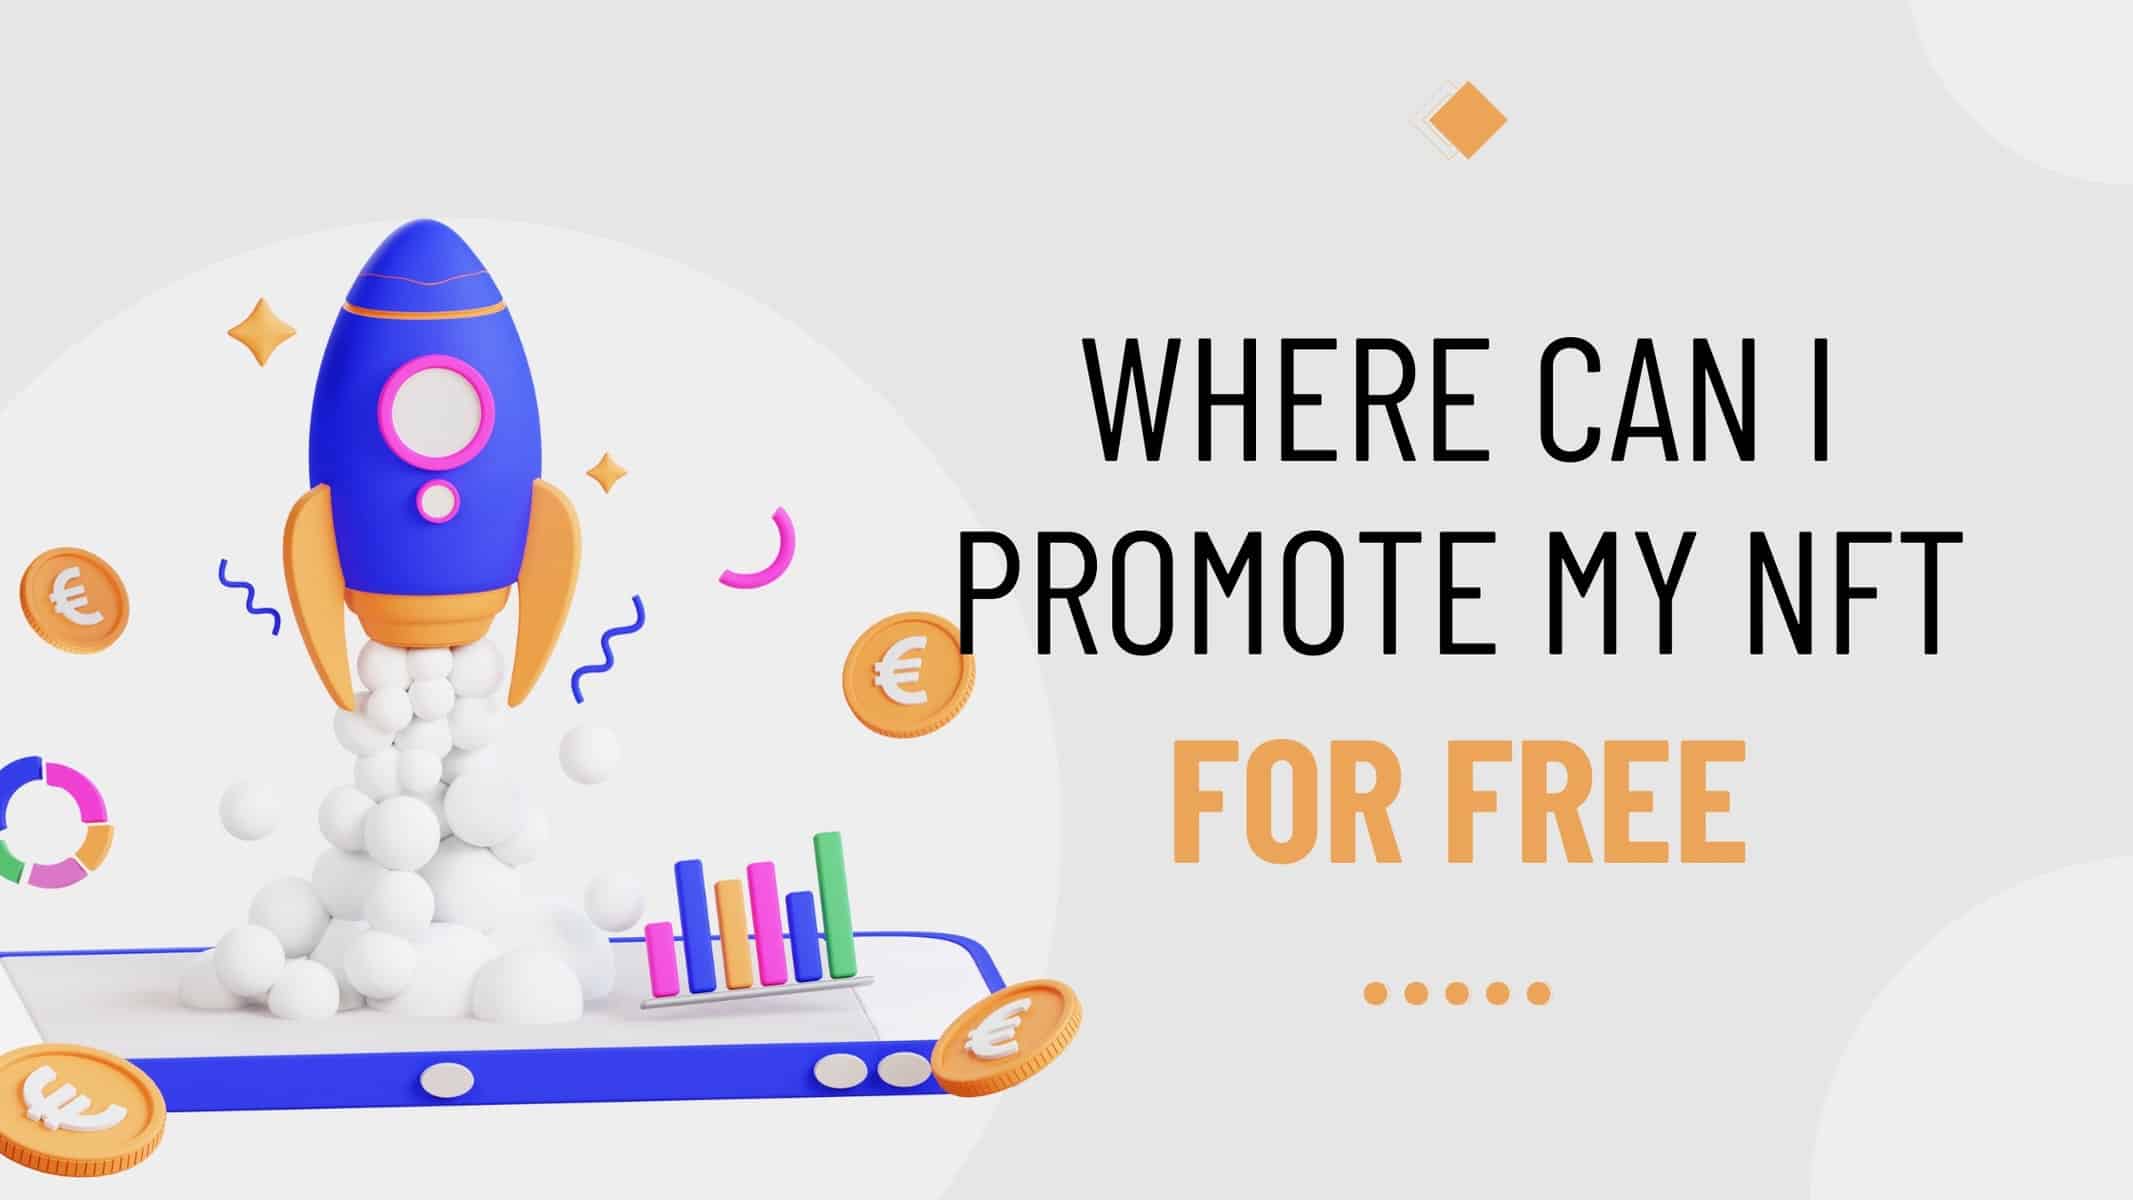 Where Can I Promote My NFT for Free?